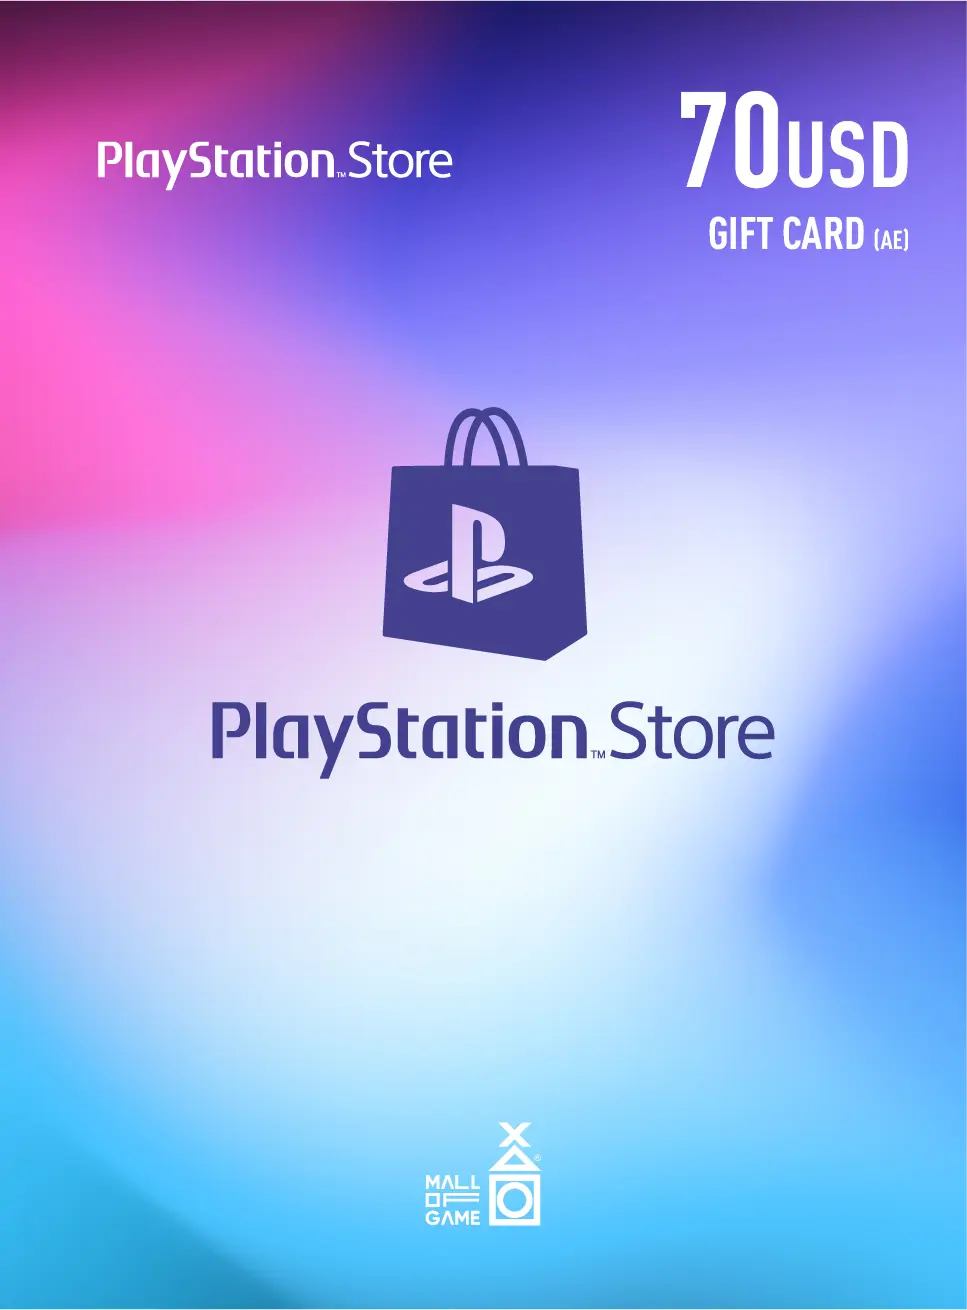 PlayStation™Store USD70 Gift Cards (AE)